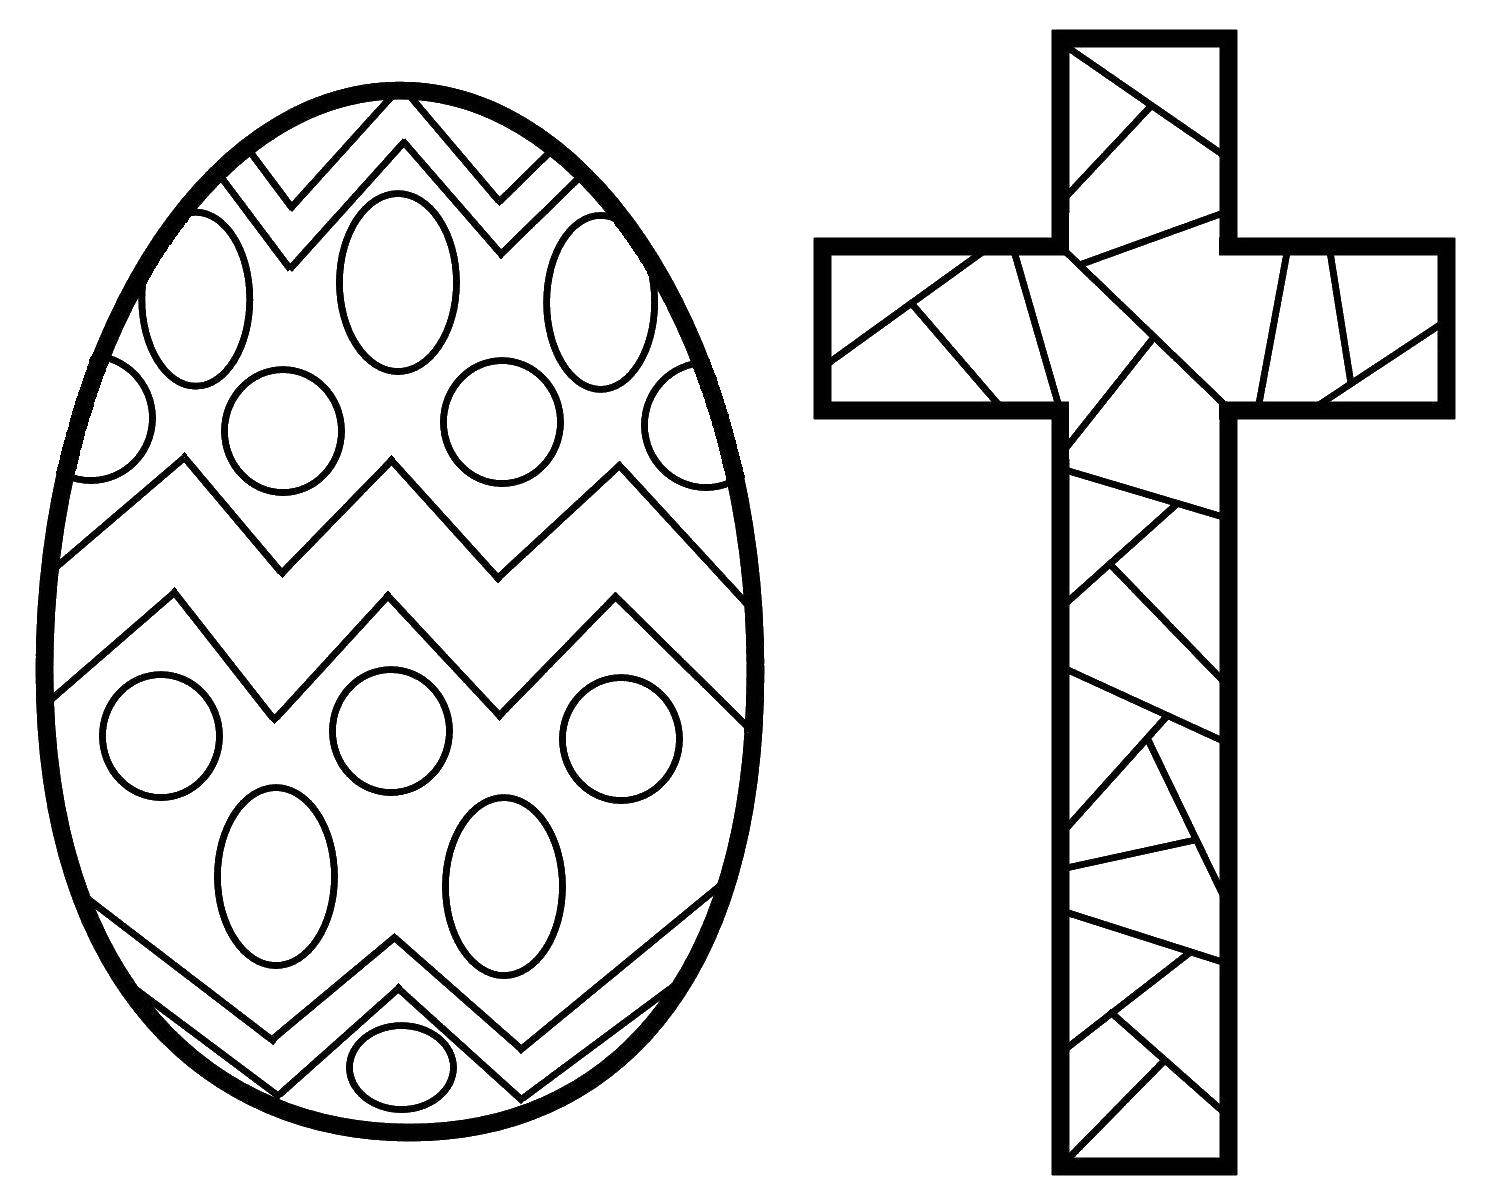 Coloring Easter and the cross. Category coloring pages cross. Tags:  cross, Easter.